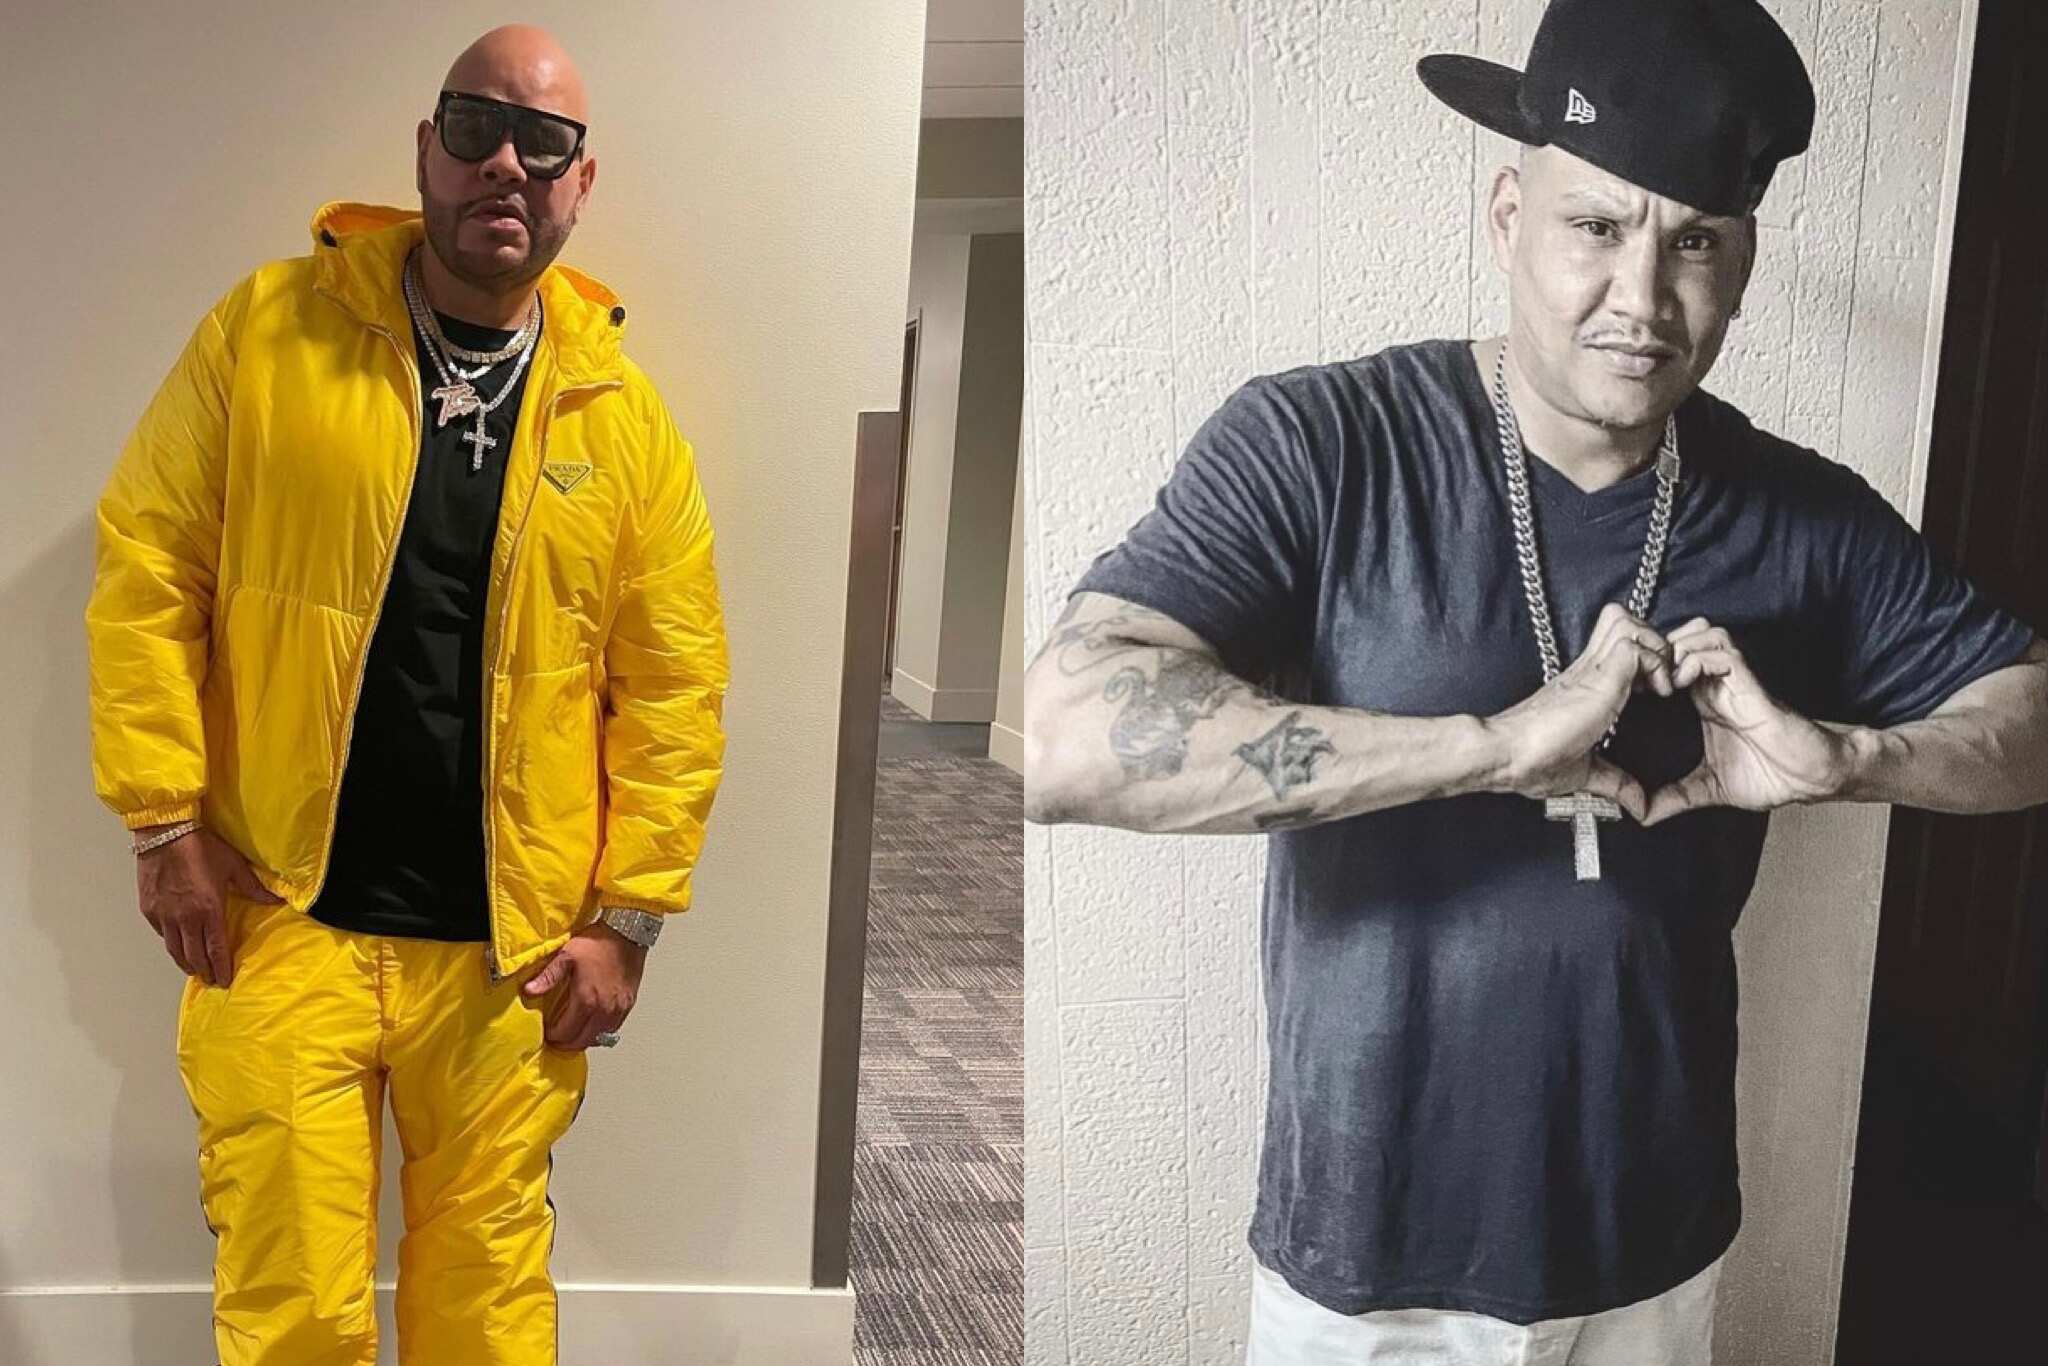 Fat Joe Defends Himself After Being Accused of Snitching by Cuban Link